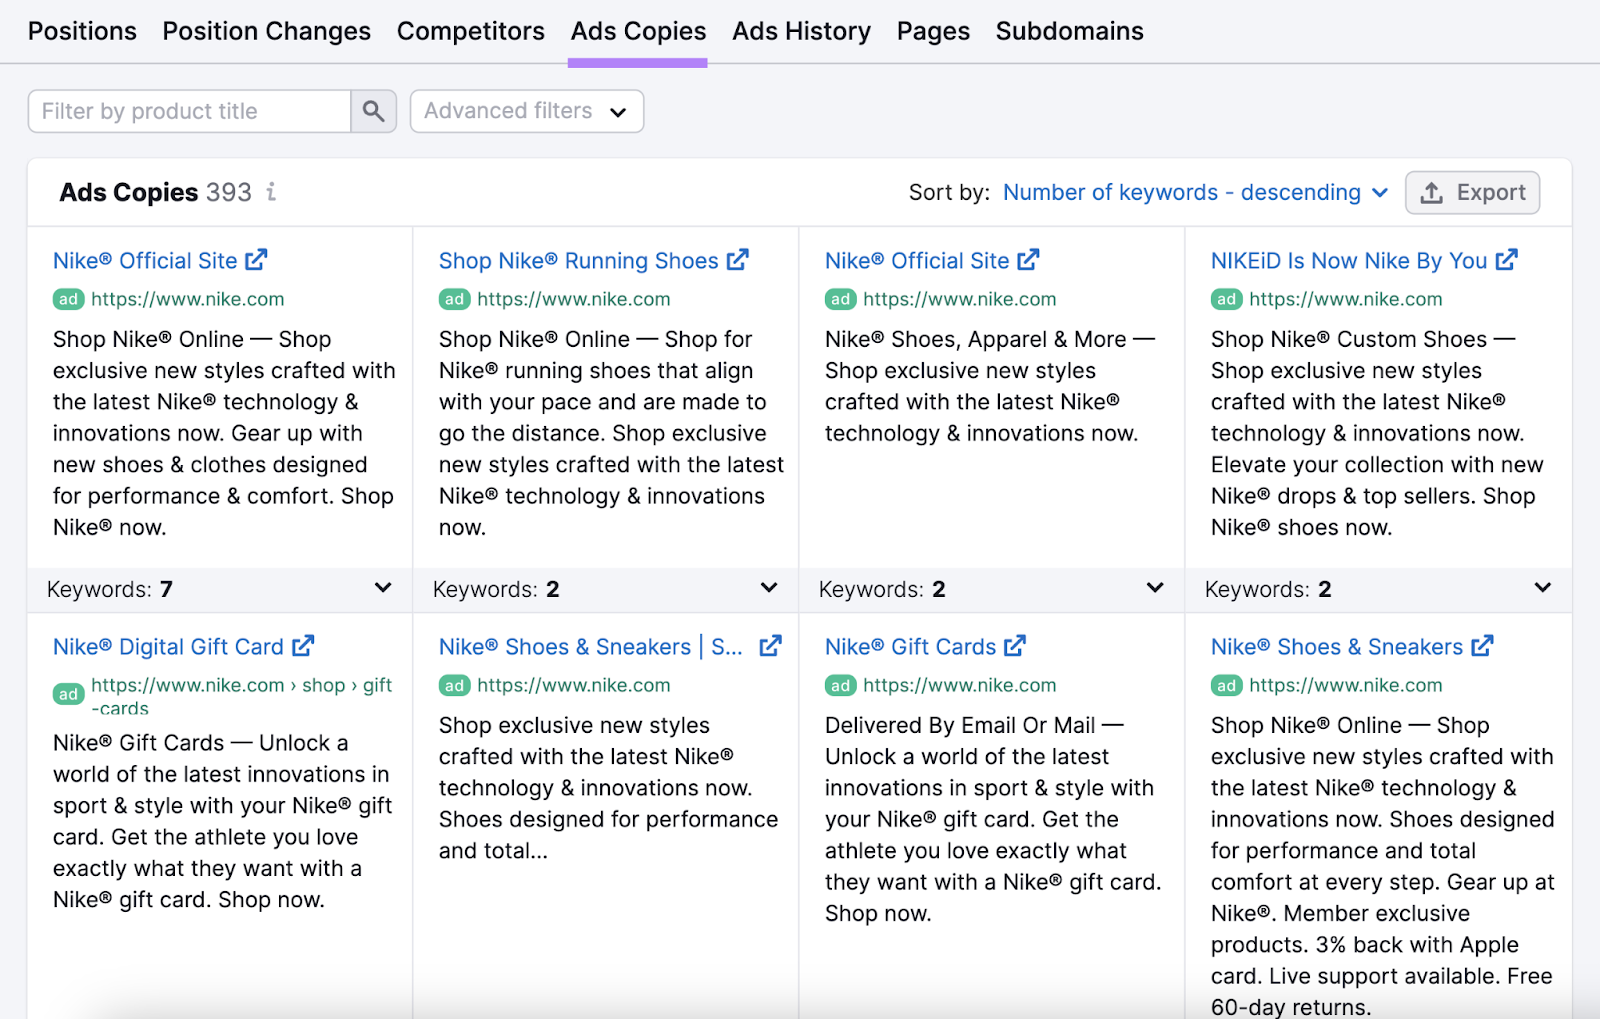 "Ads Copies" dashboard in Advertising Research tool